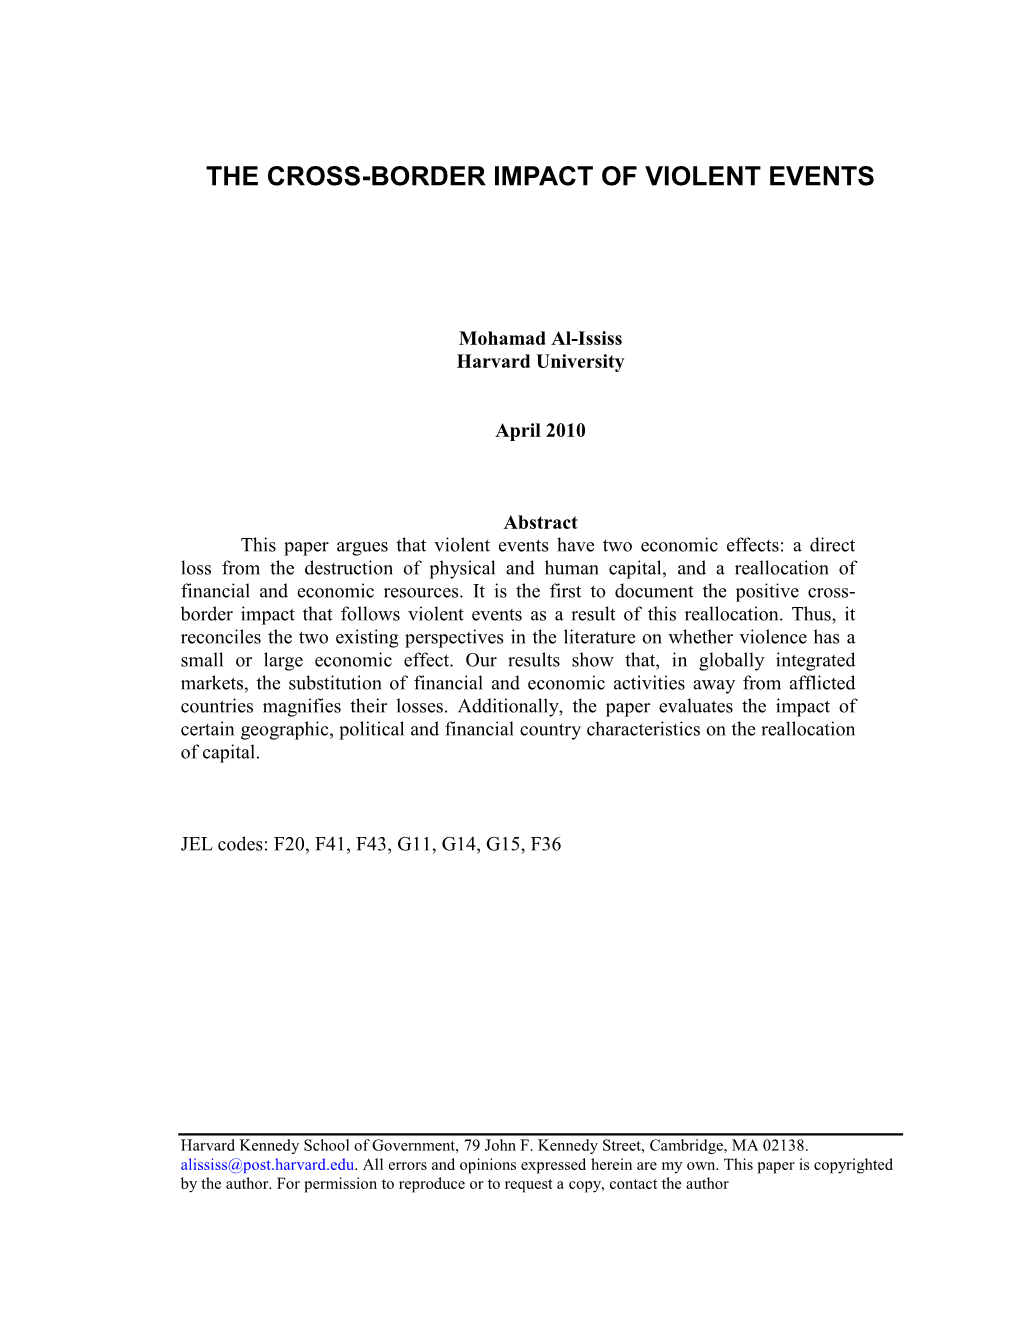 The Cross Border Financial Impact of Violent Events